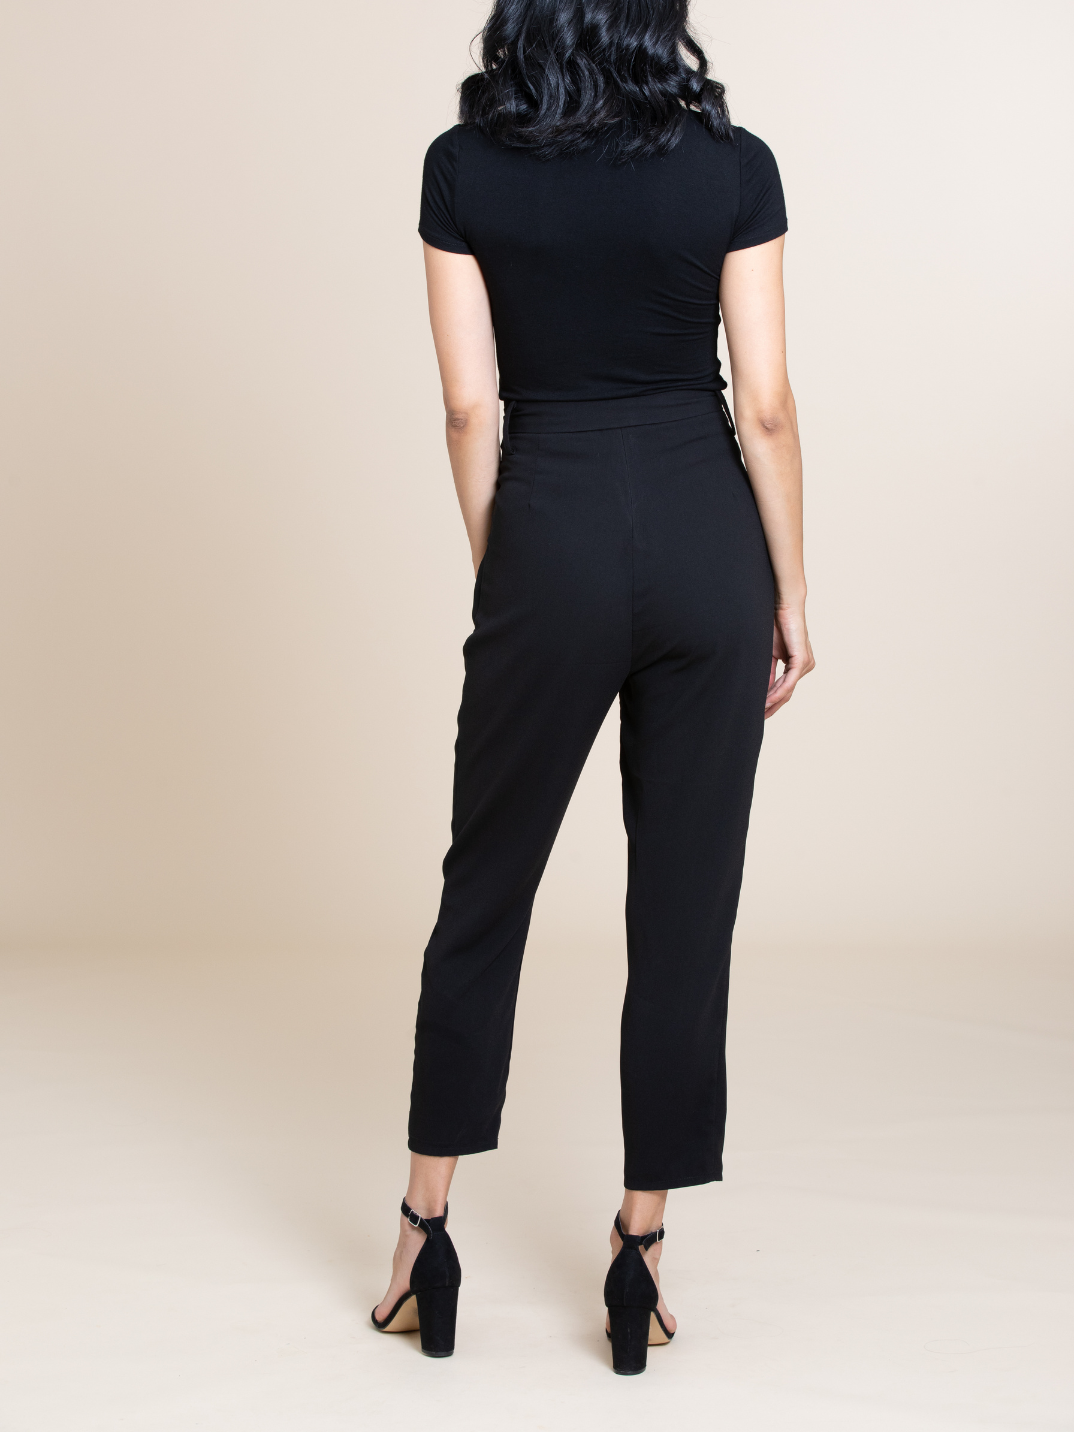 The most flattering trousers out there, we promise. The Lexi combine comfort and style with an easy-yet-sophisticated silhouette and paper bag waist. Pair with heels for work or throw on sneakers and the Kara bodysuit for casual comfort. Breathable and wrinkle-resistant fabric for 100% convenience. shop sustainable fashion capsule wardrobe